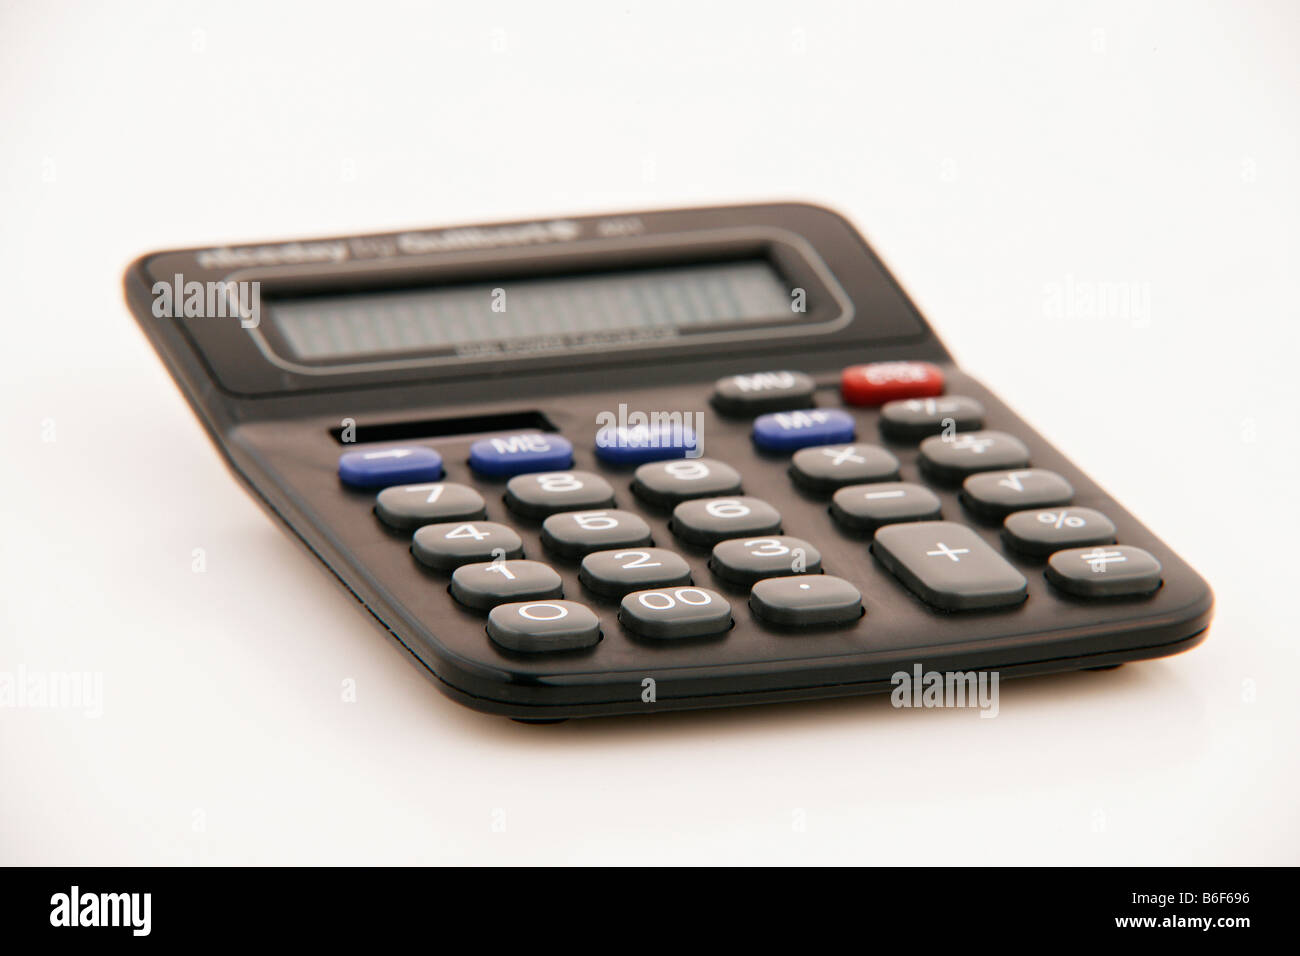 A black calculator on a white background Stock Photo